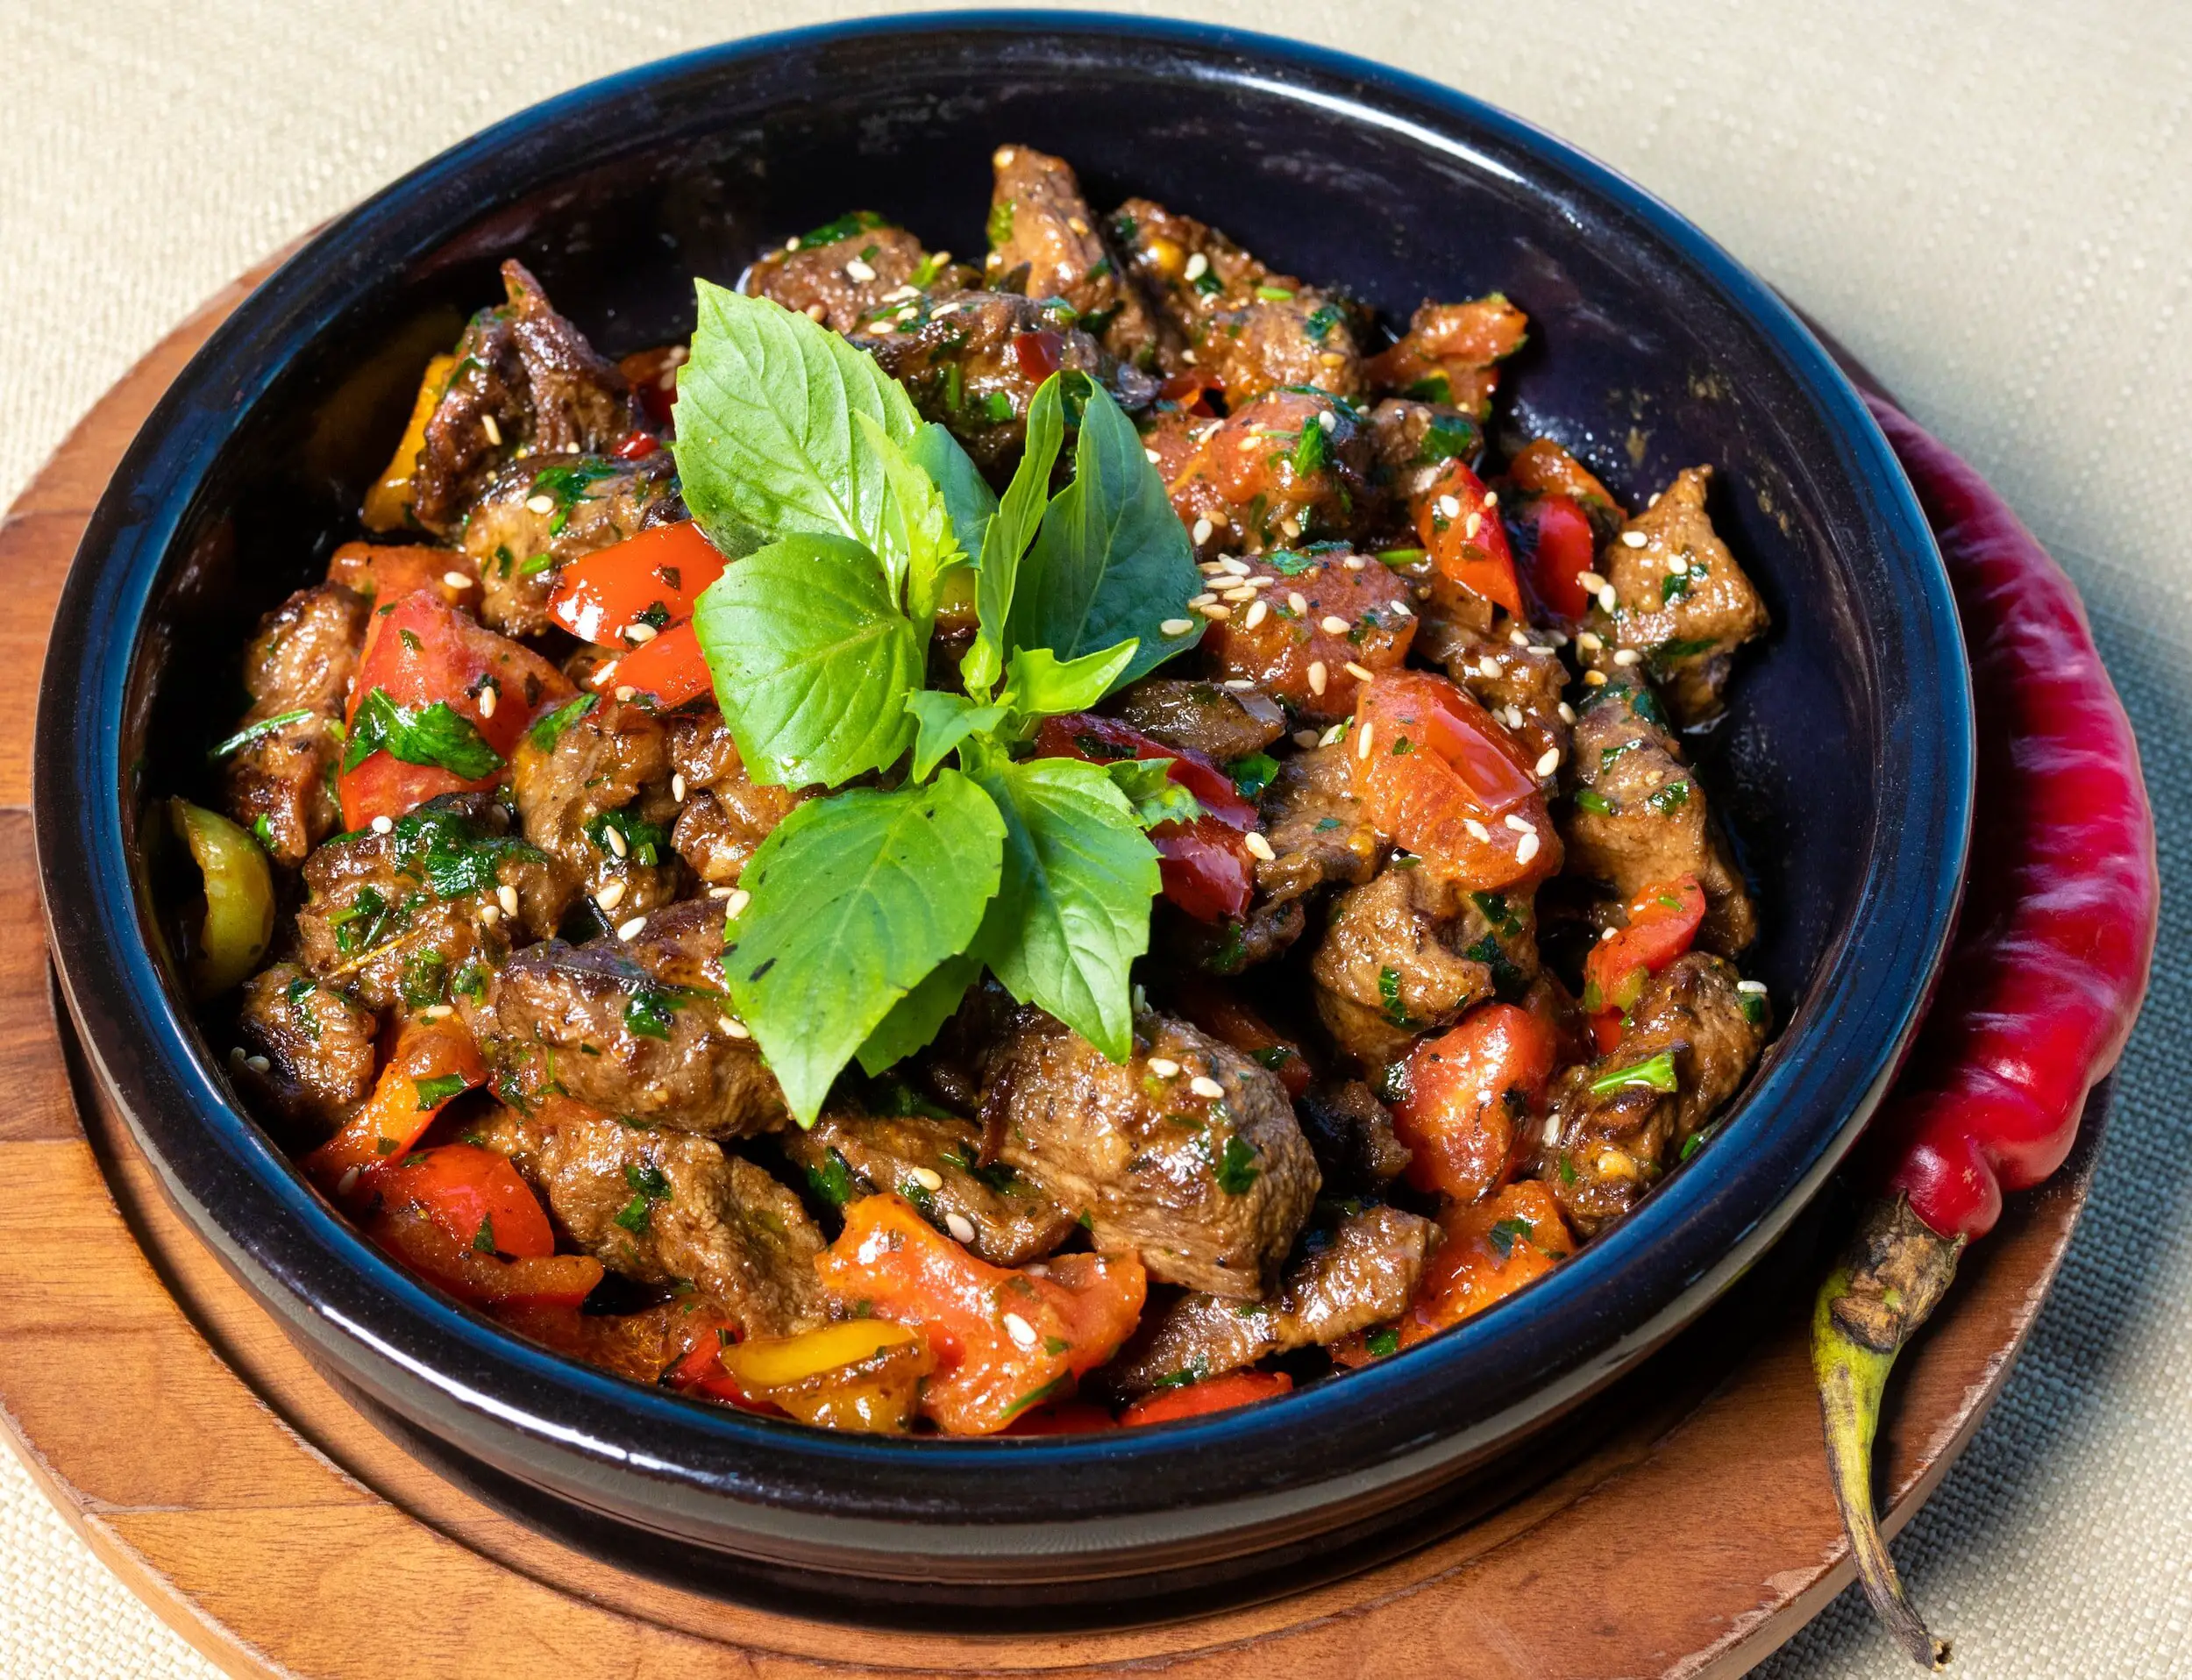 Meat dishes that go well with merlot - beef stew